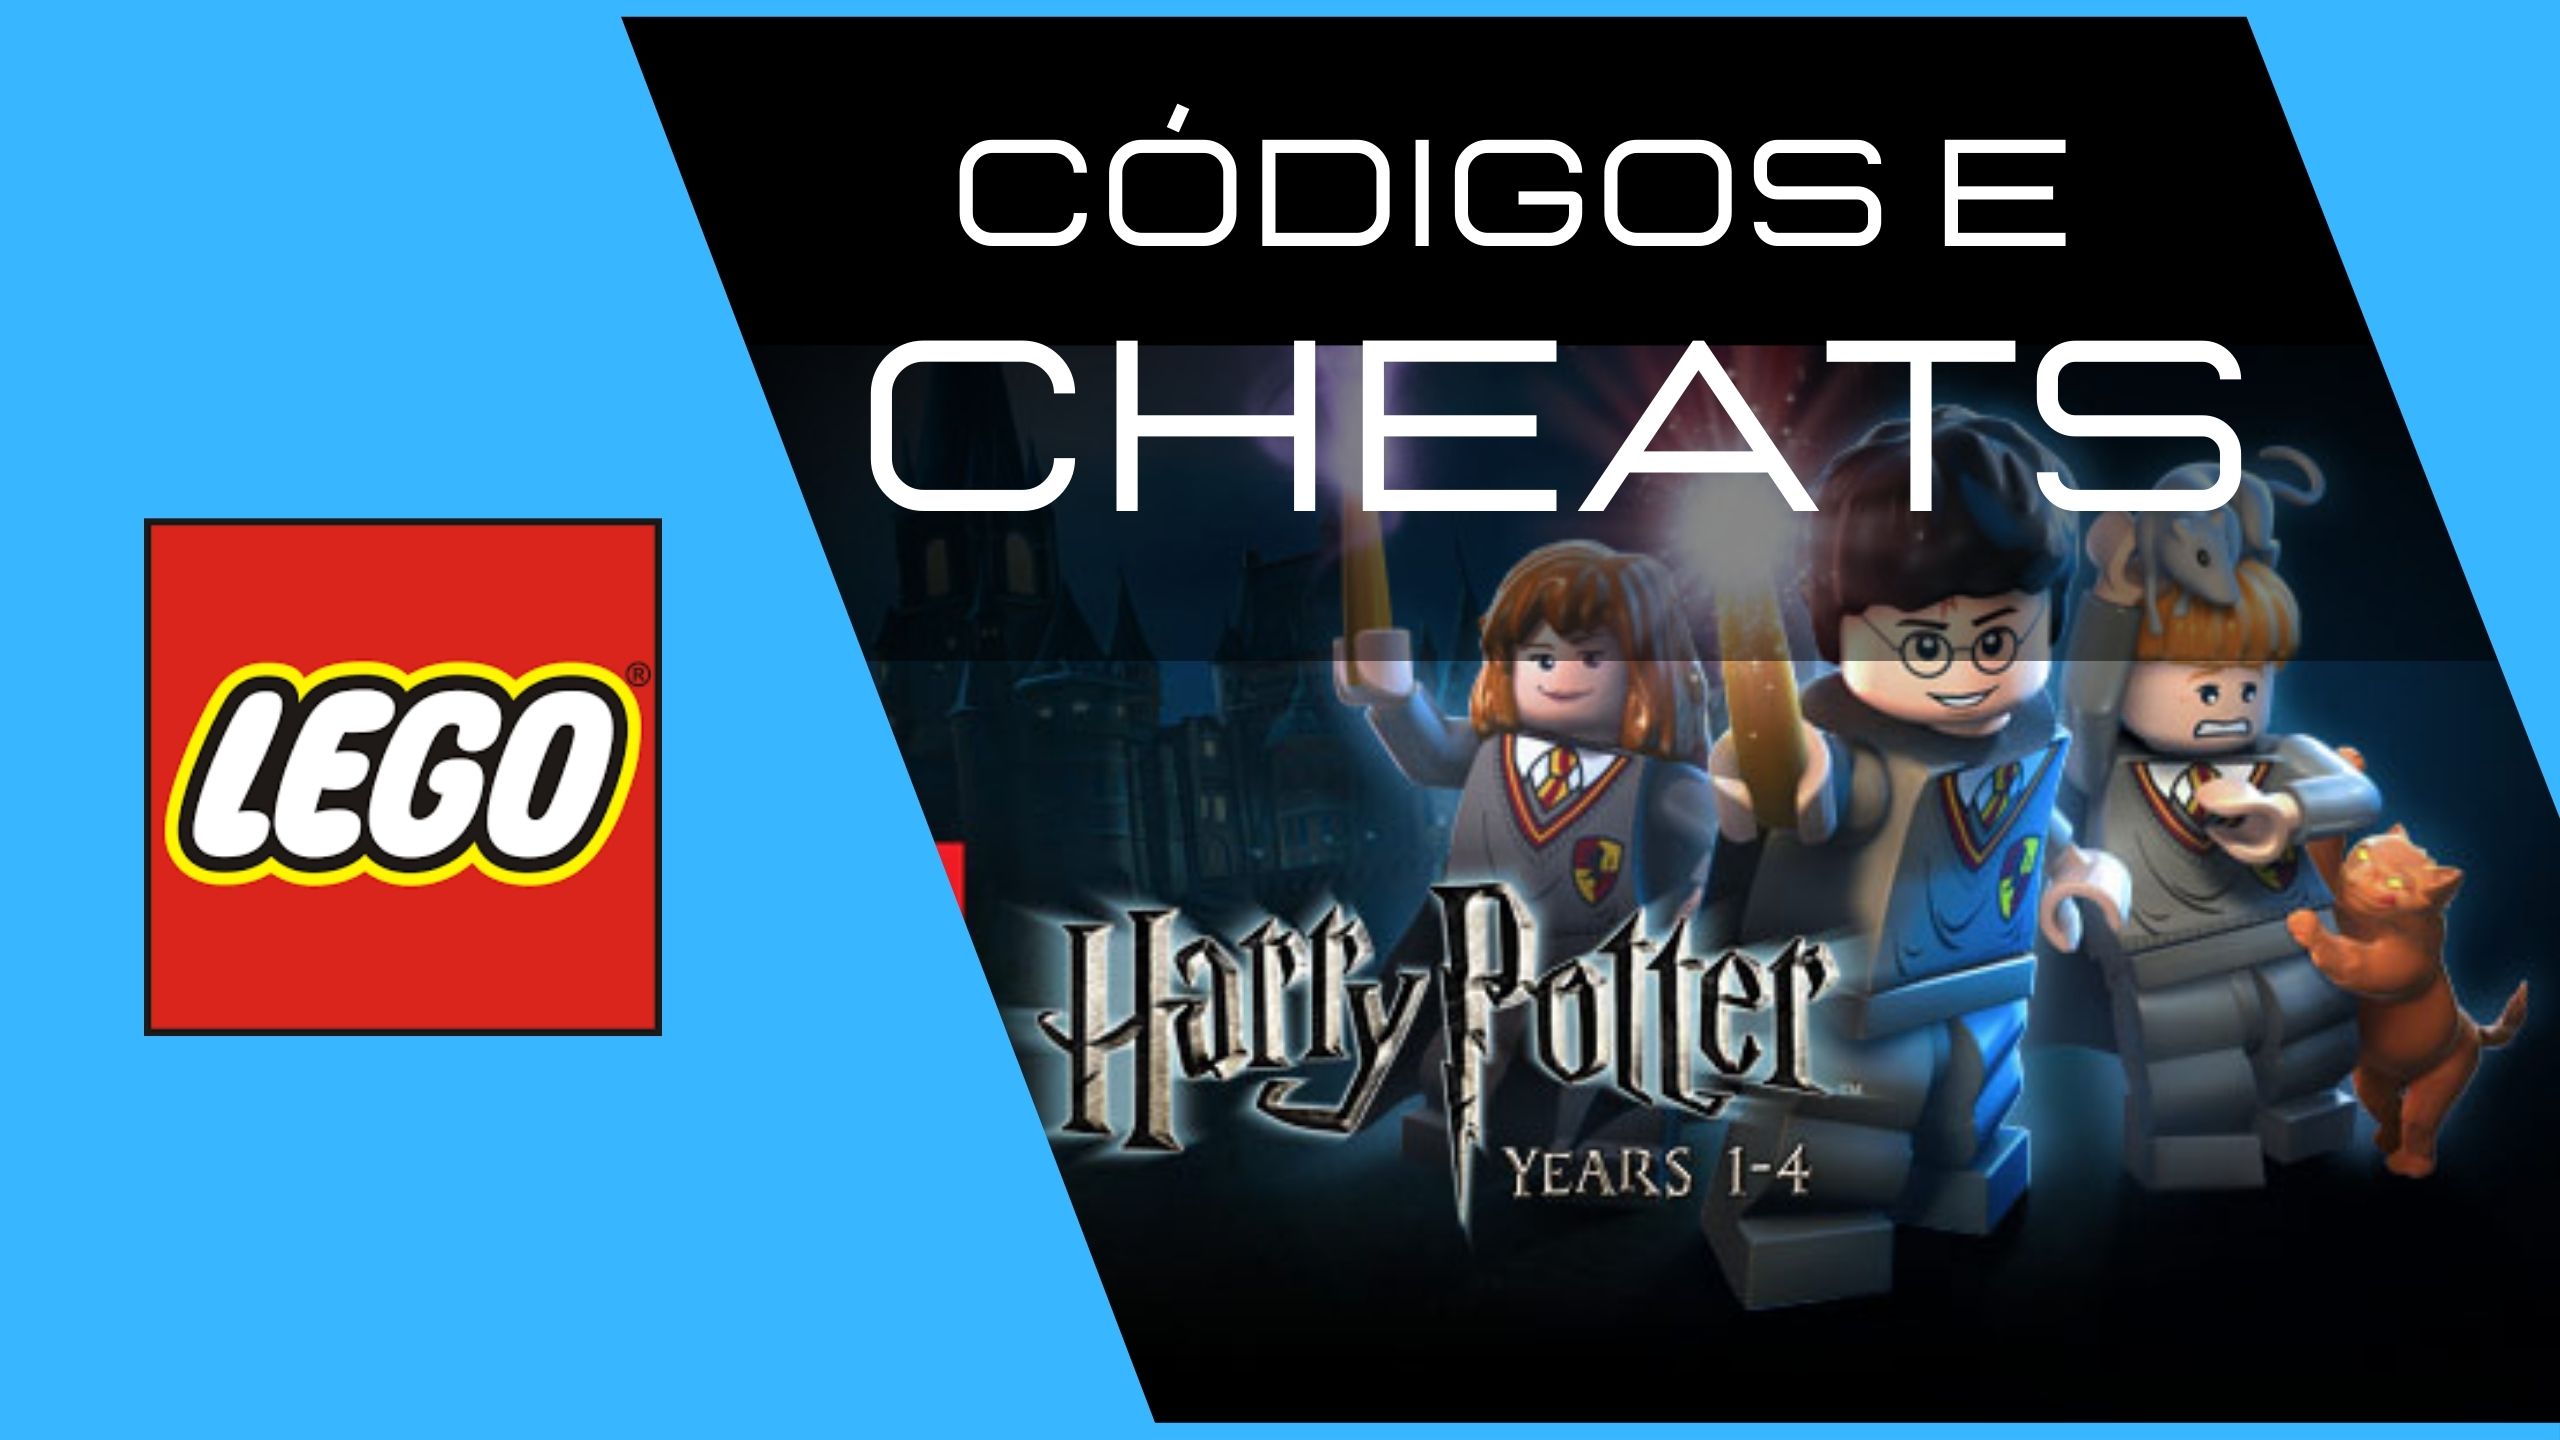 Lego Harry Potter Collection - Years 1-4 - Cheat Codes! 